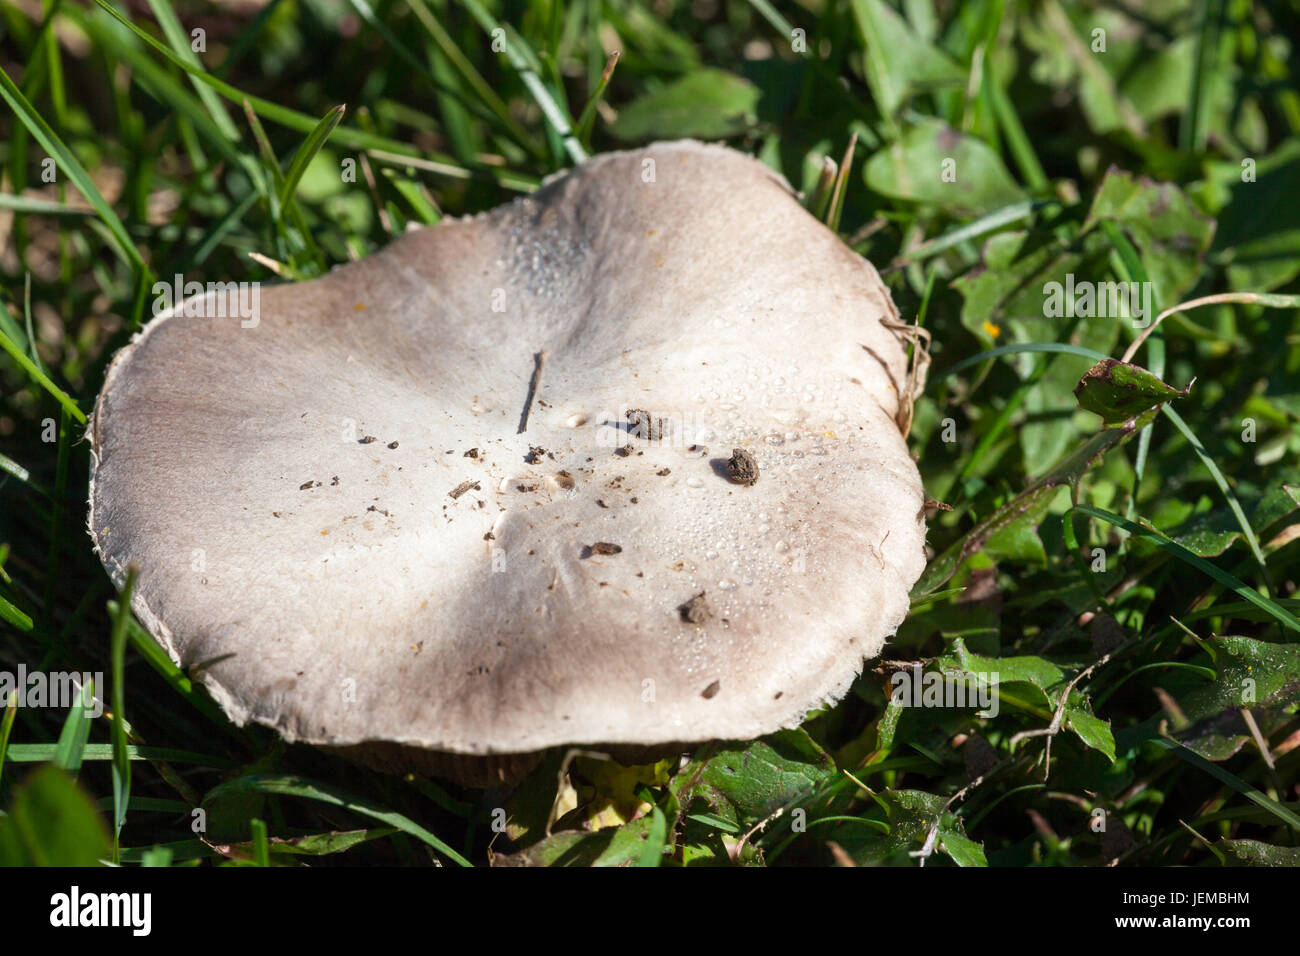 A flat top white mushroom grows in grass and weeds in summer sunshine. Stock Photo